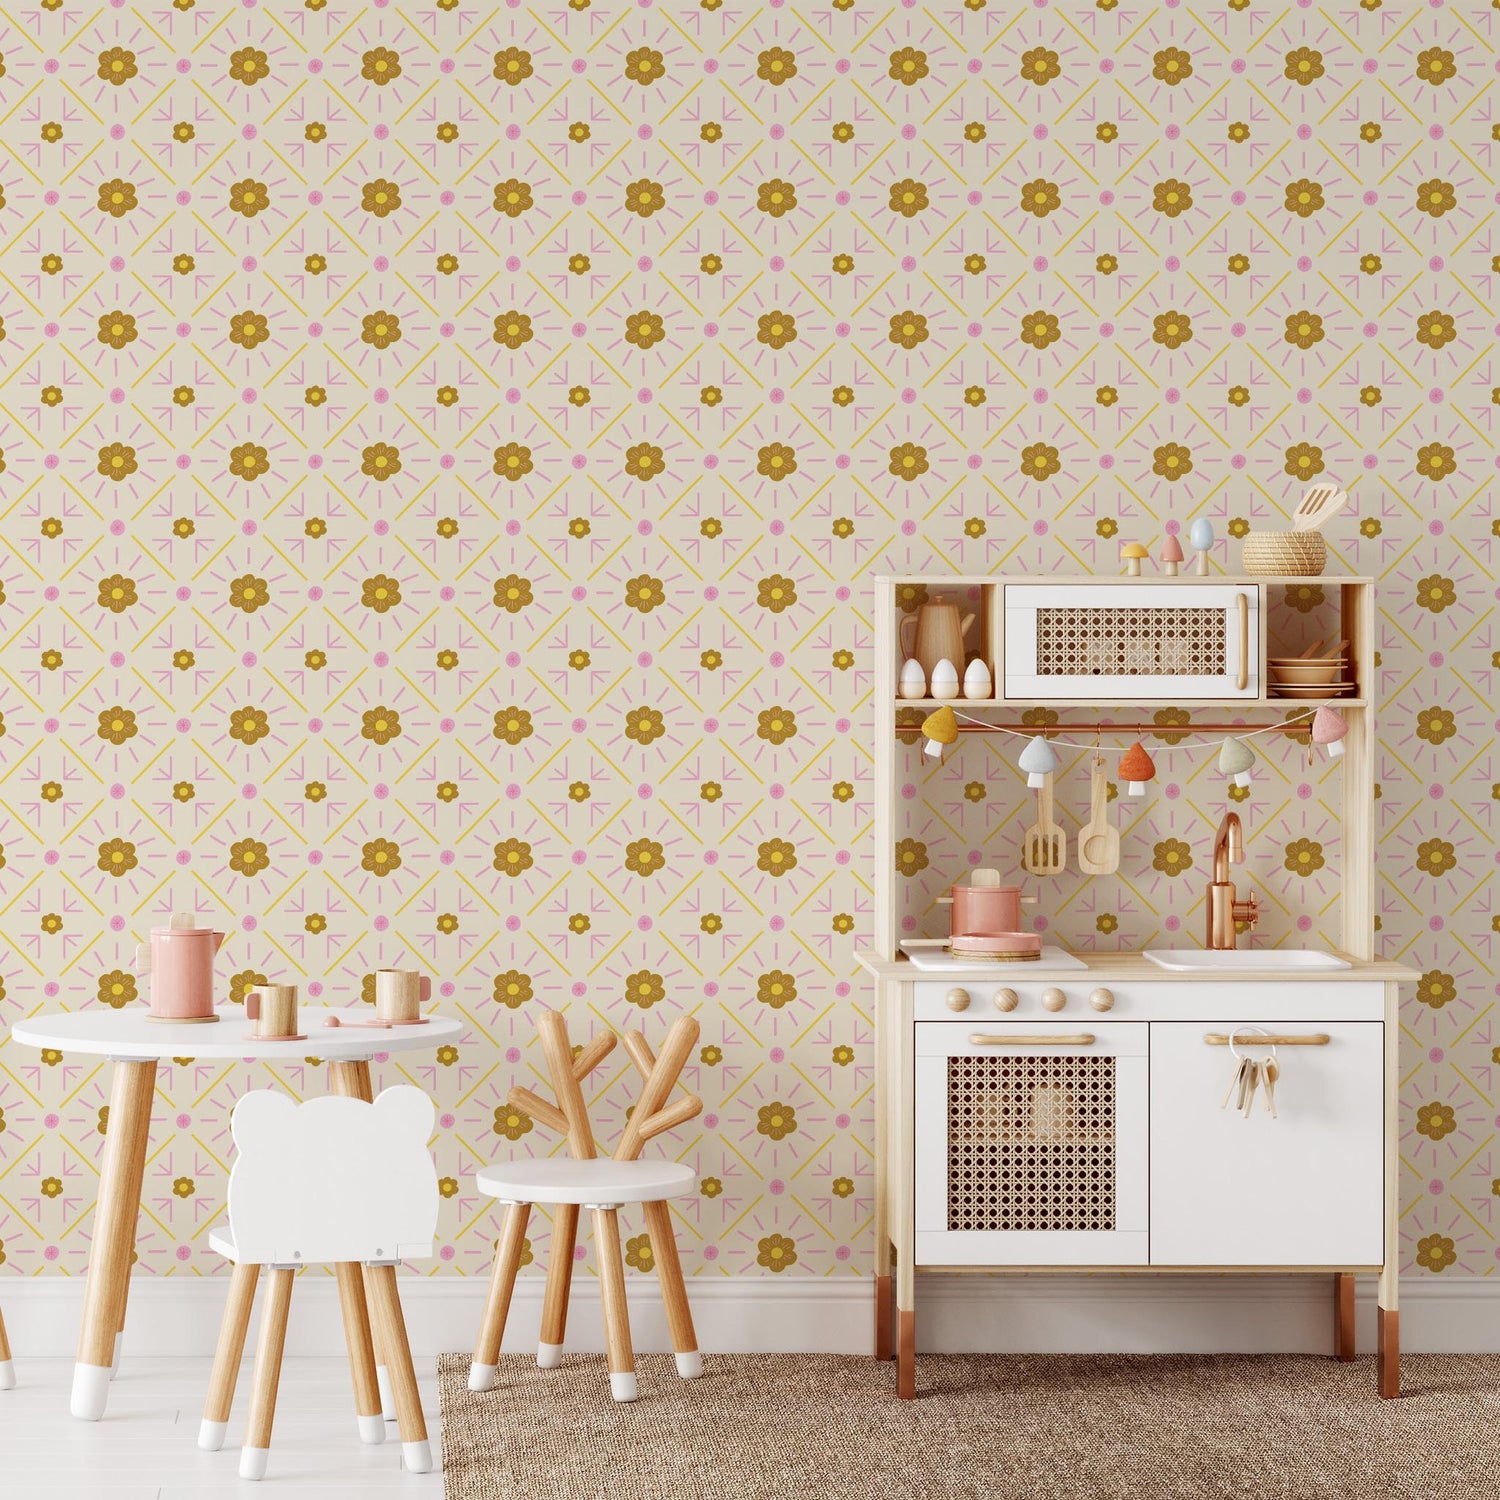 Playroom preview of Daisy Squares Wallpaper in Green and Yellow by artist Brenda Bird